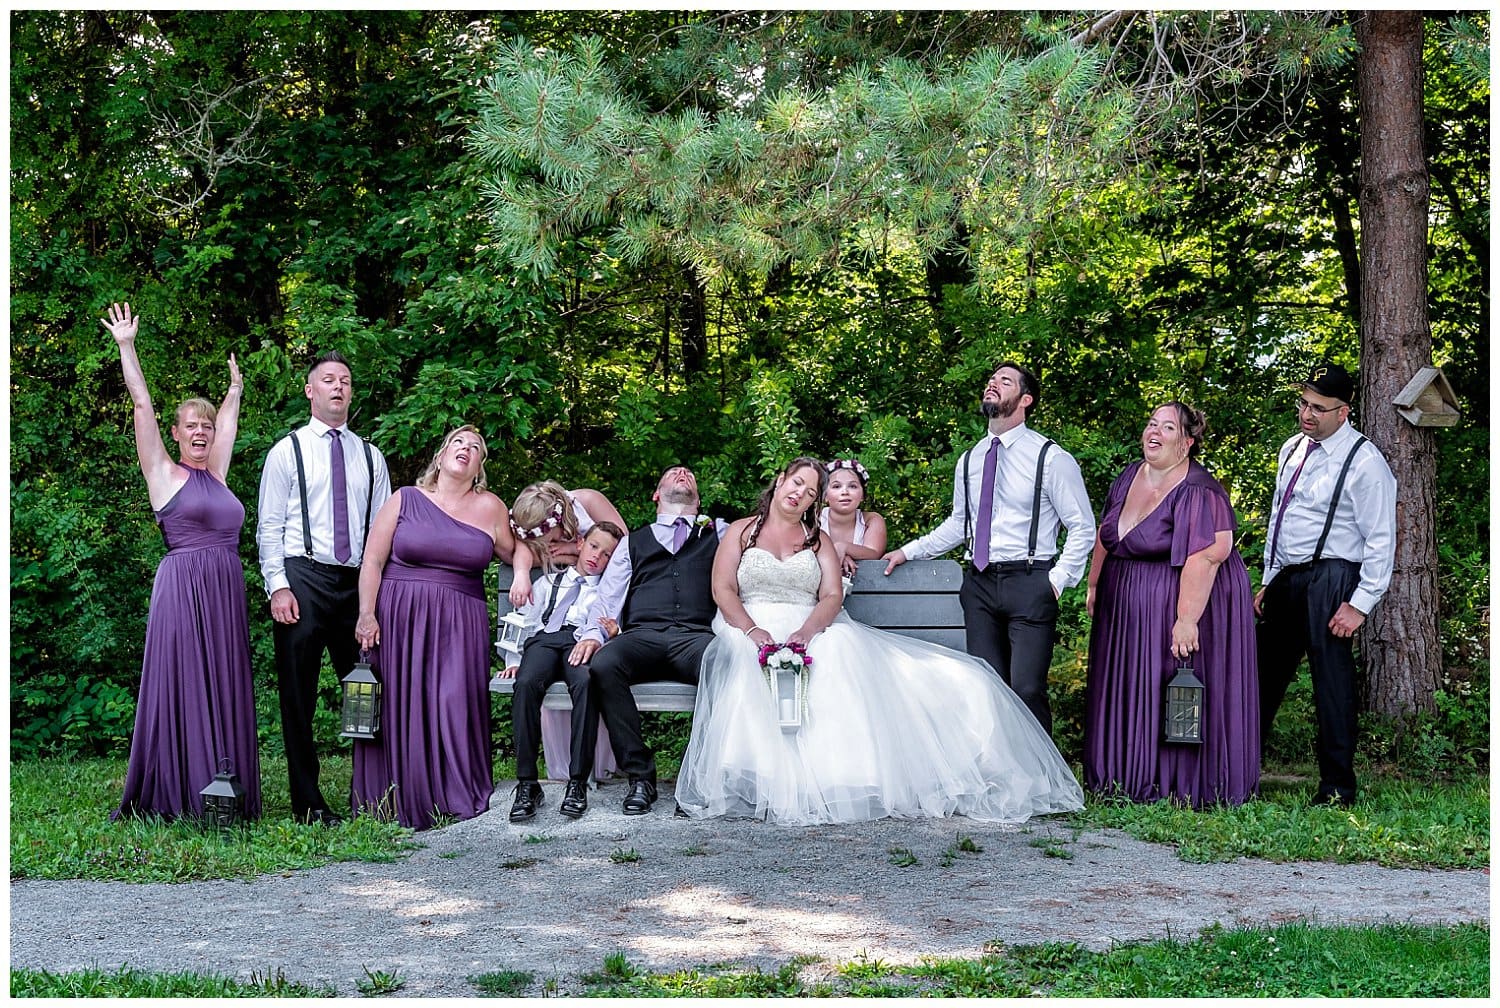 The wedding party pose exhausted in 41 degree weather at Acadia Park in Sackville NS,